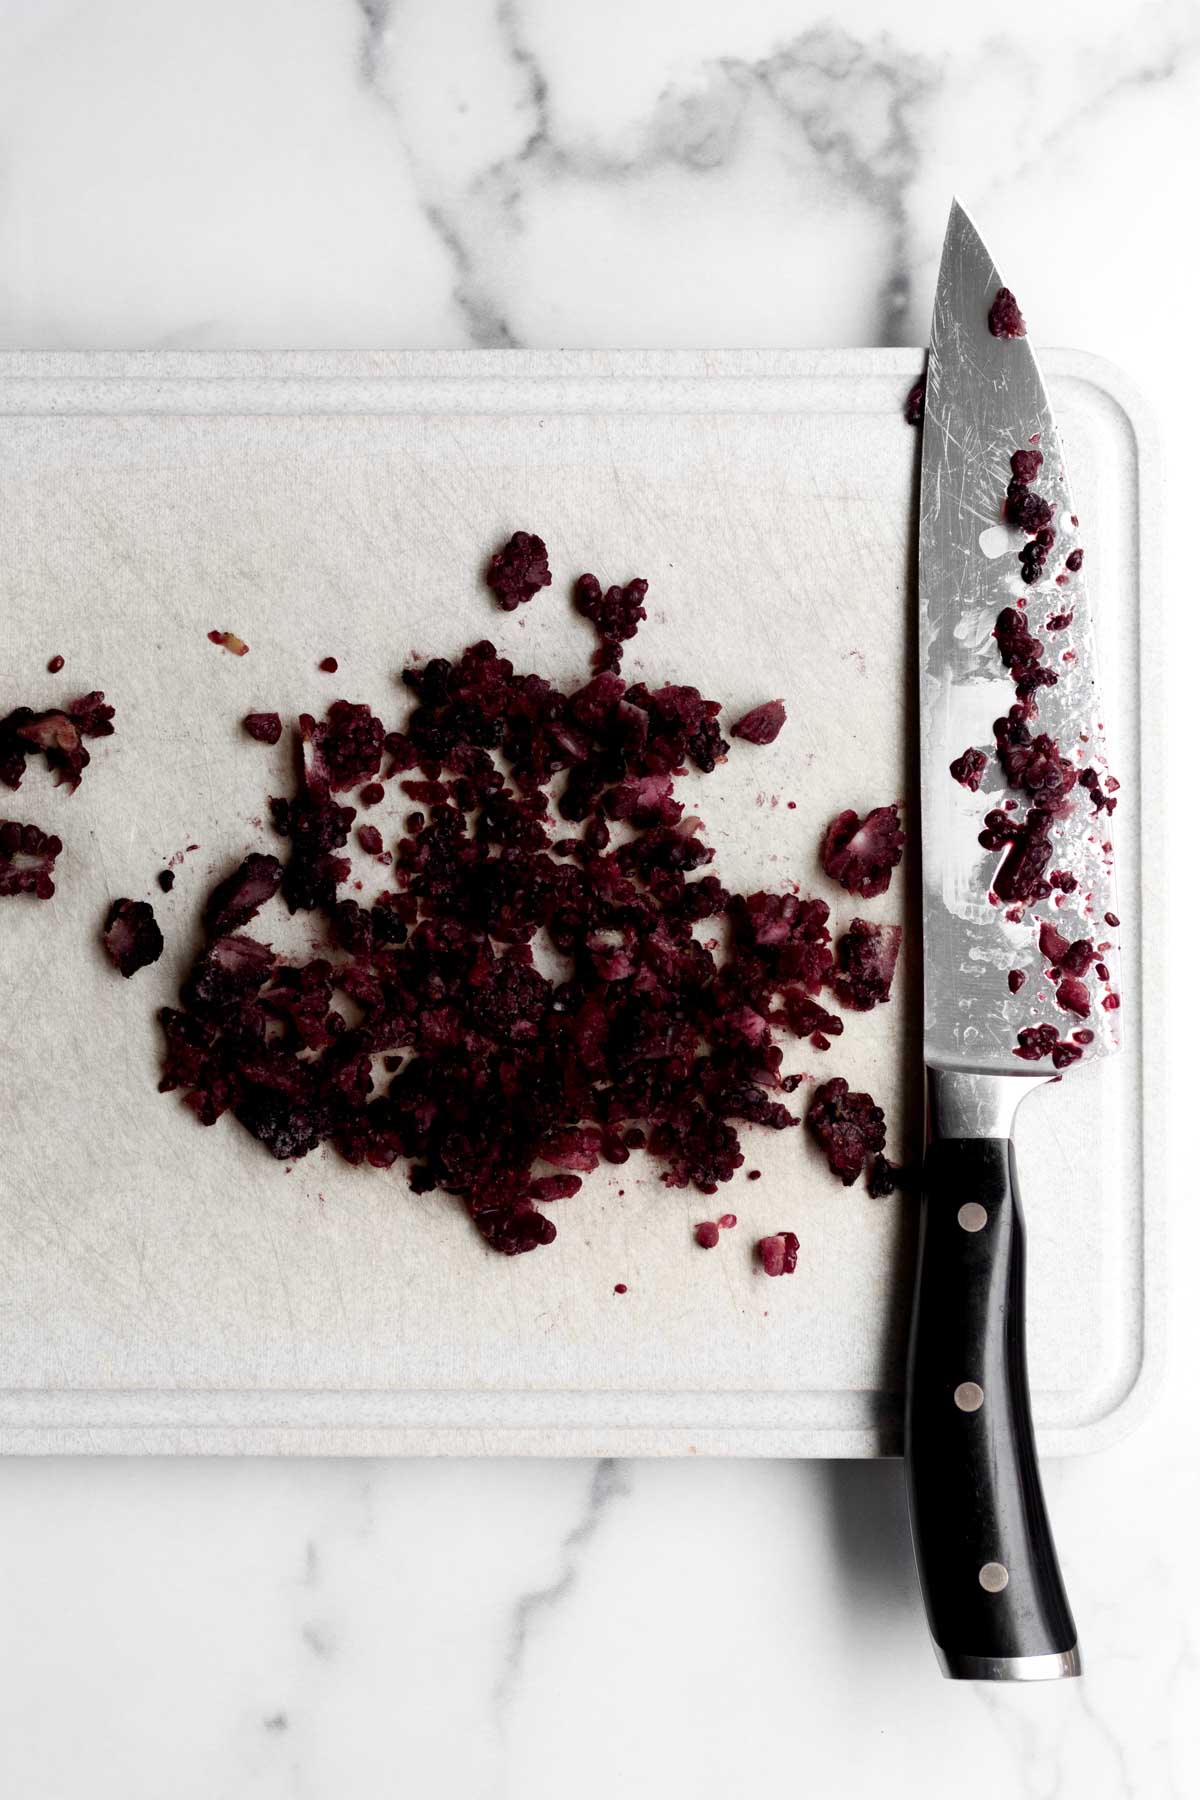 Chopped frozen blackberries on a cutting board with a knife.